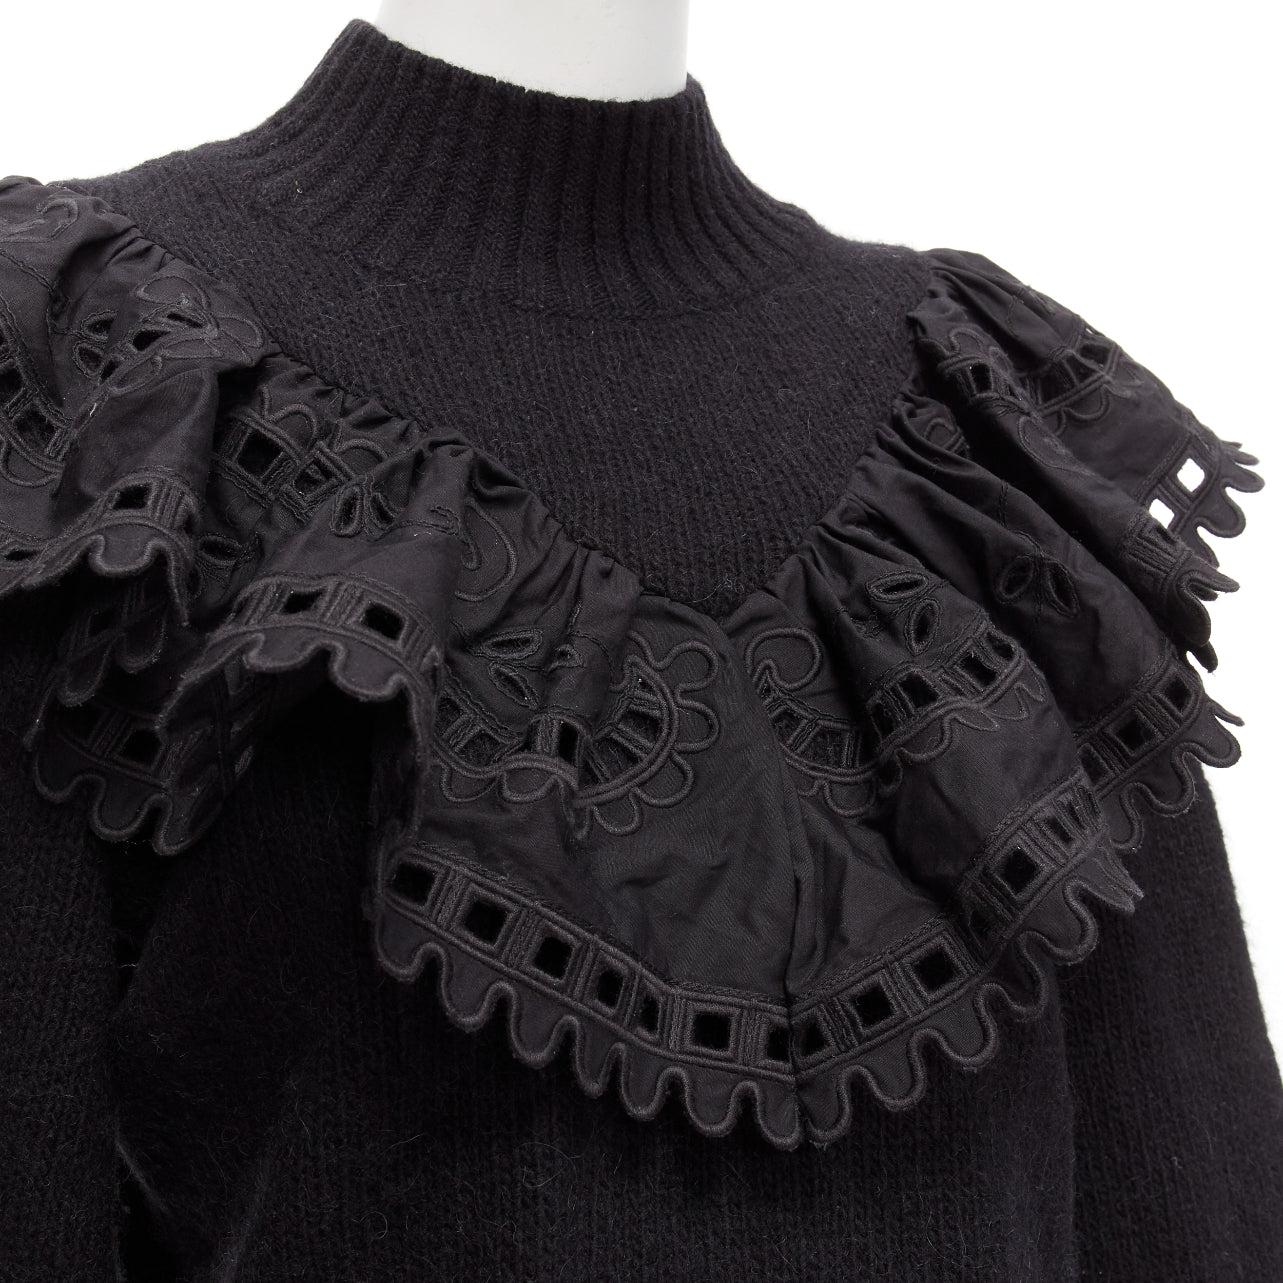 SEA NEW YORK black merino wool alpaca Victorian ruffle crop sweater XS
Reference: AAWC/A00820
Brand: SEA NEW YORK
Material: Merino Wool, Alpaca, Blend
Color: Black
Pattern: Solid
Closure: Slip On
Made in: China

CONDITION:
Condition: Excellent, this